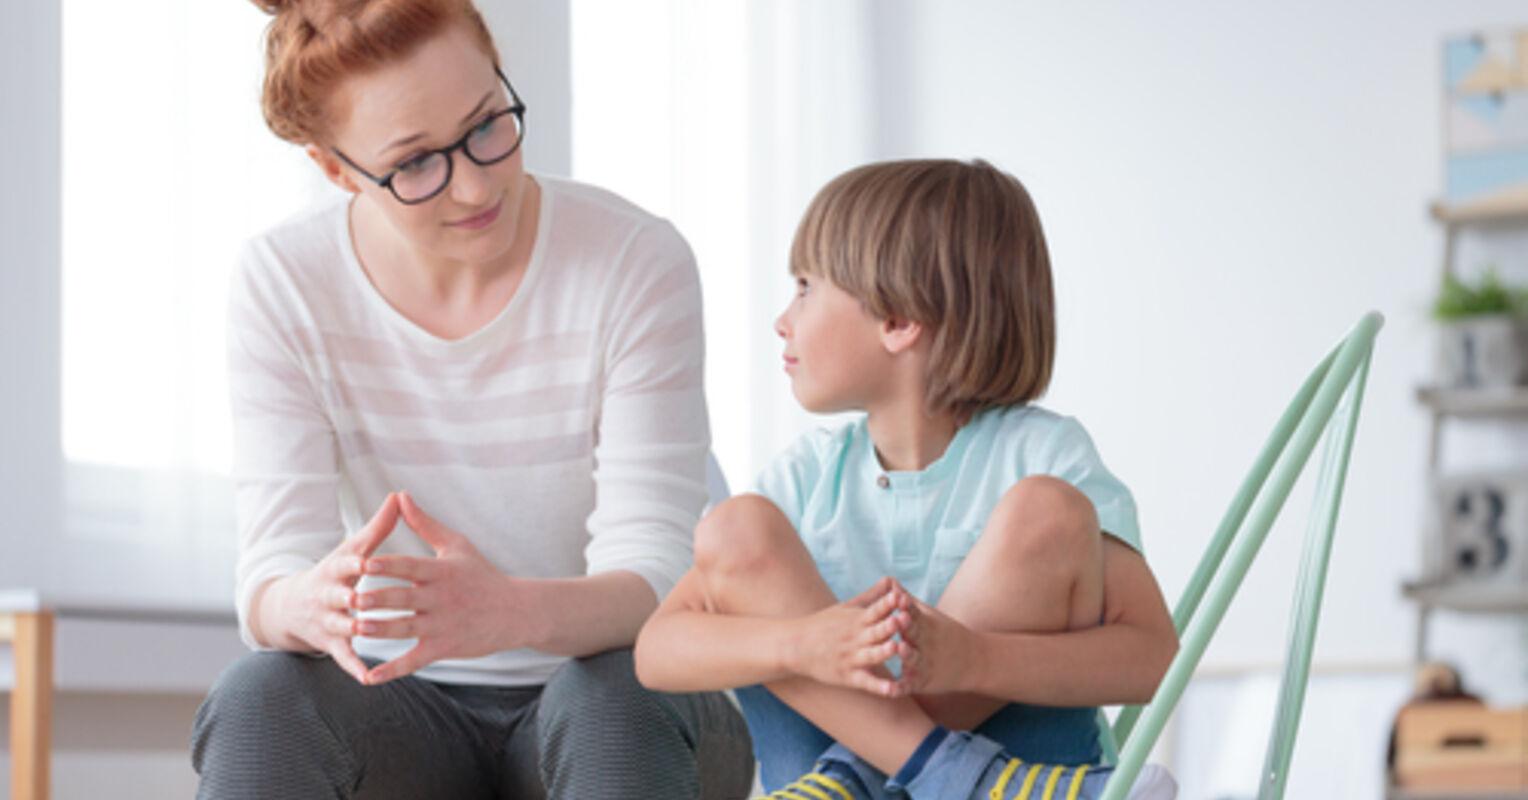 4 Tips for Handling Common Parenting Difficulties